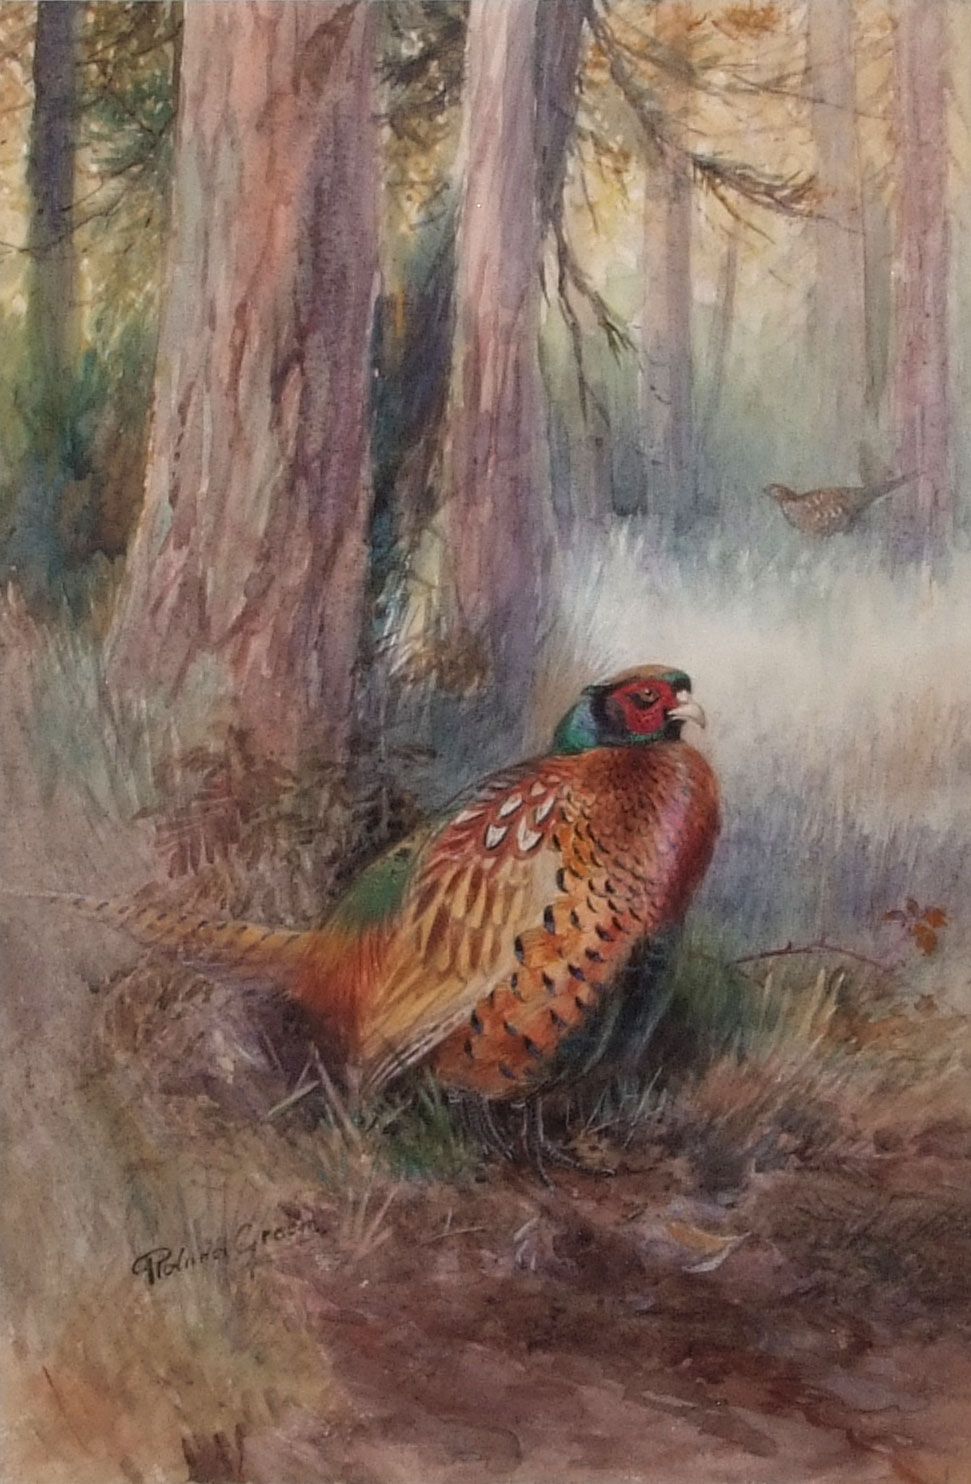 AR Roland Green (1896-1972), Pheasant in woodland, watercolour, signed lower left, 47 x 31cm